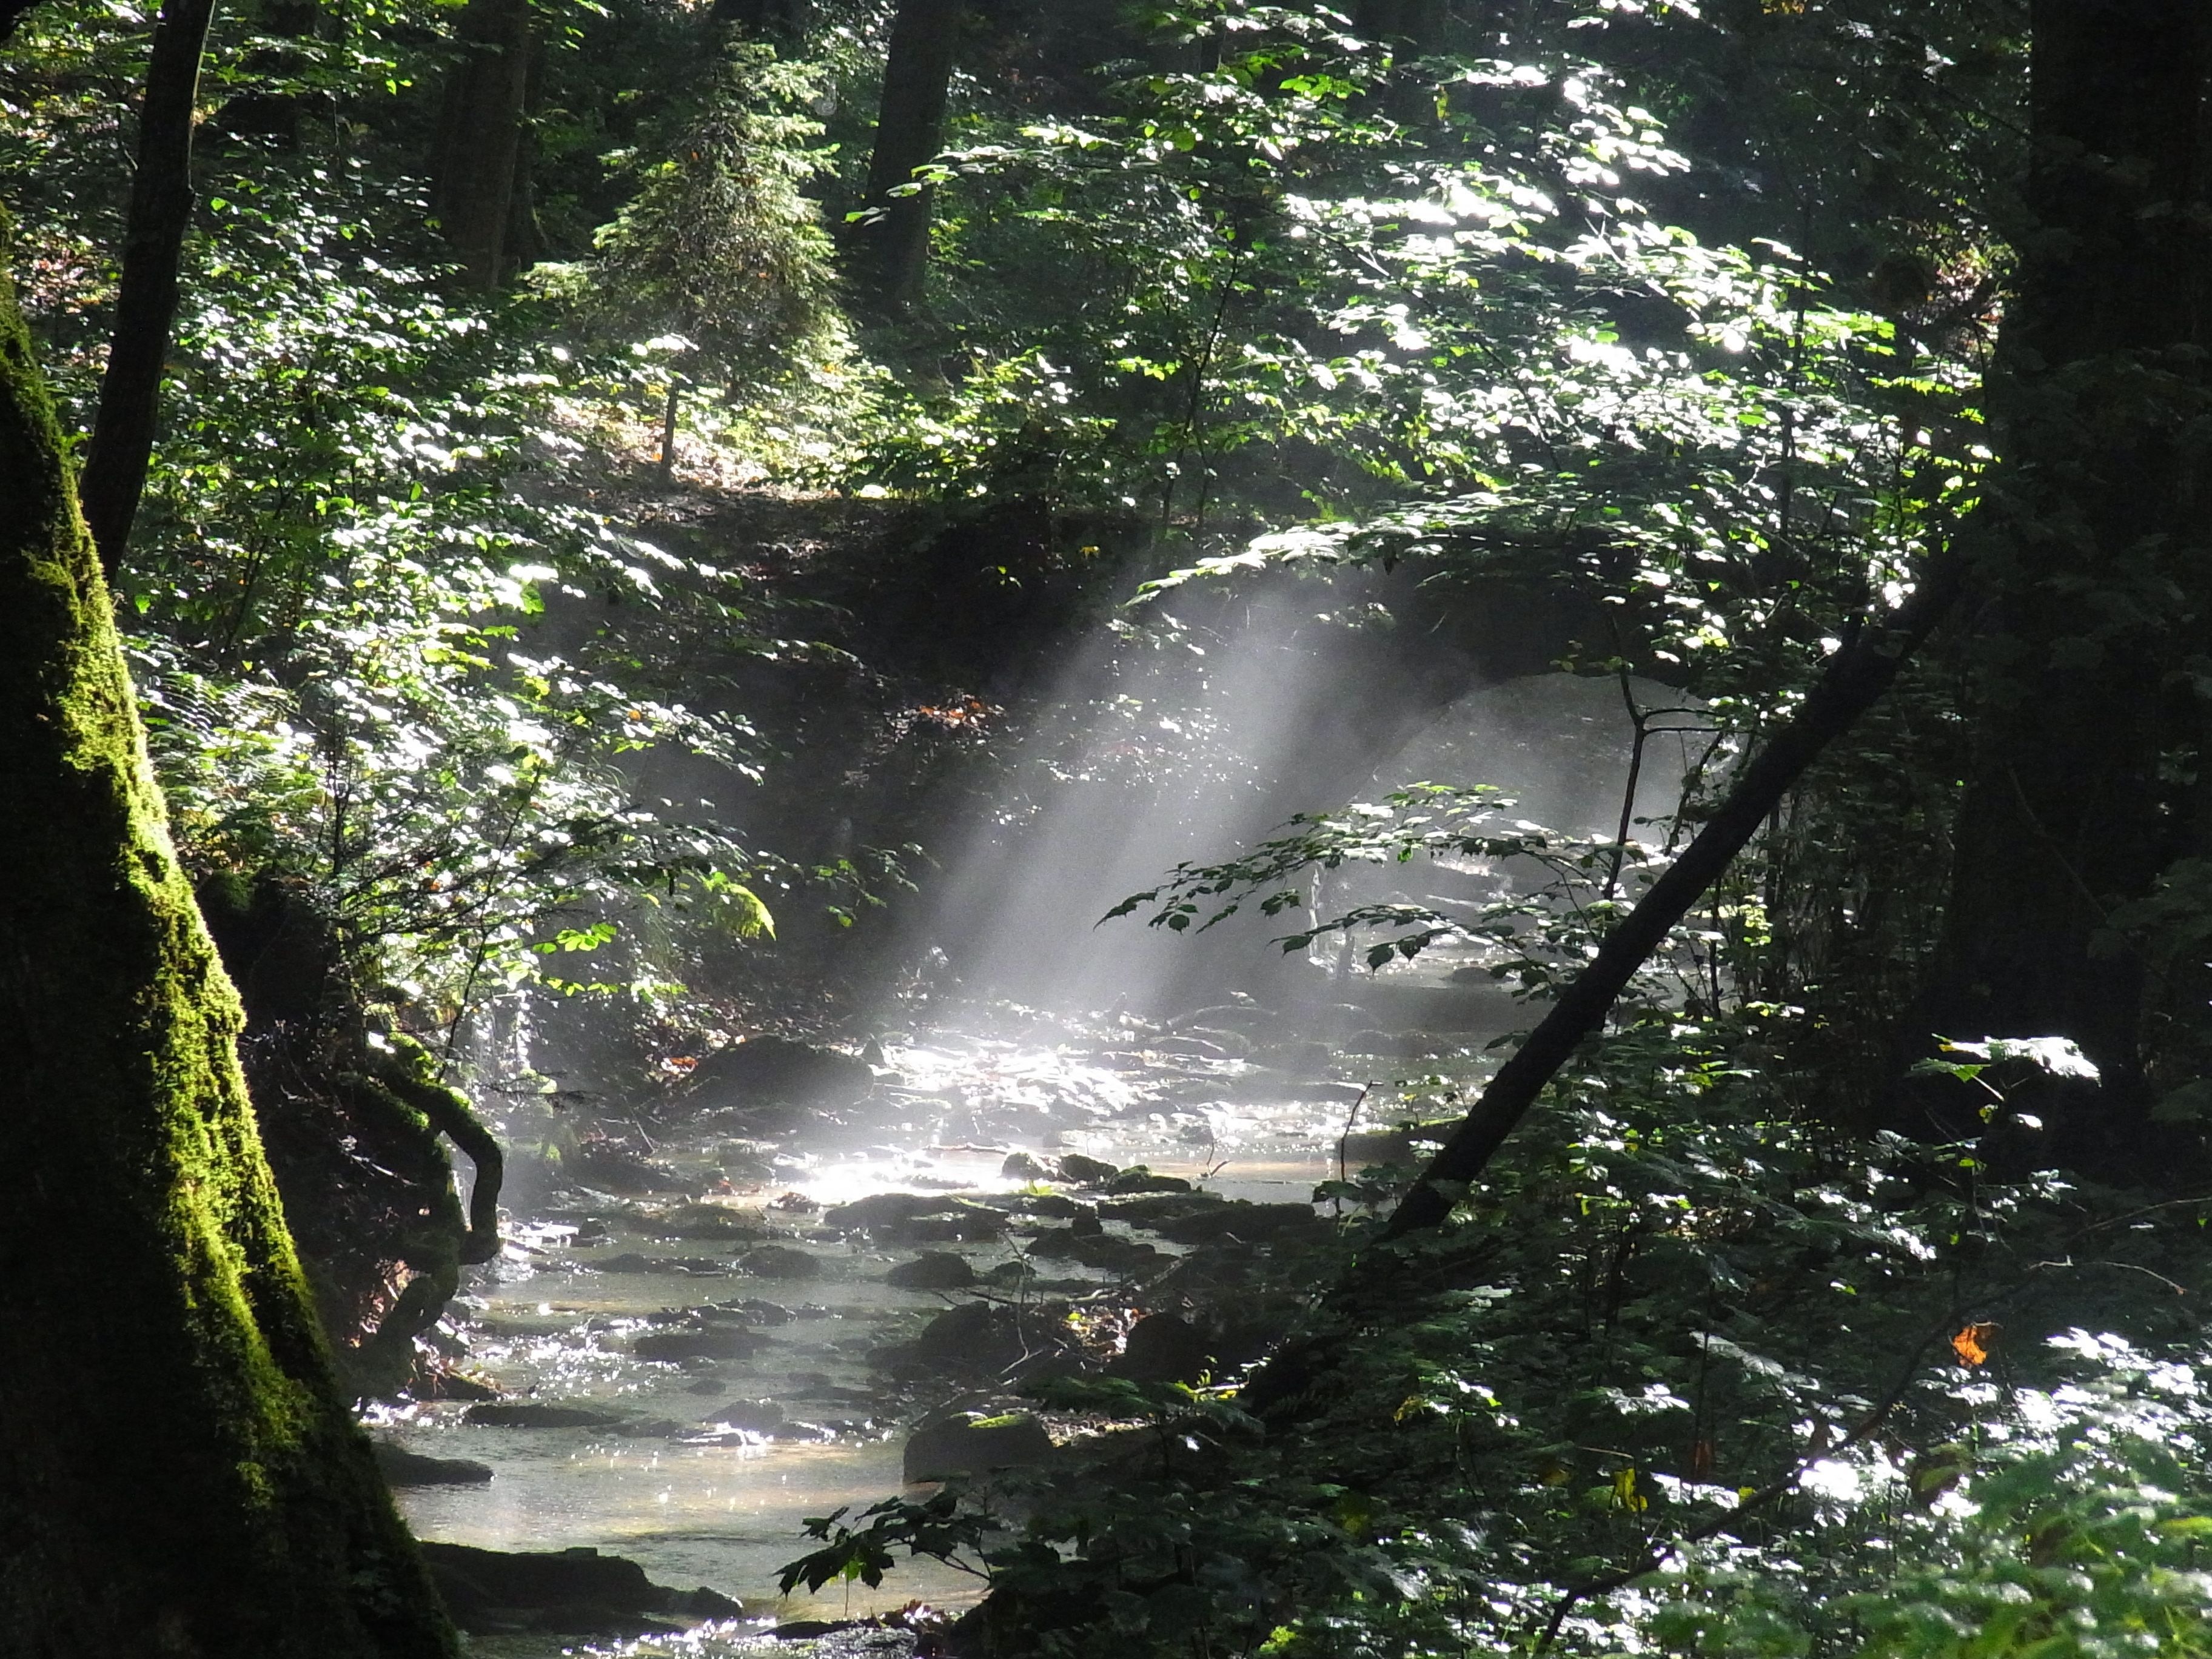 Sunlight falls on a forested river in the tropics